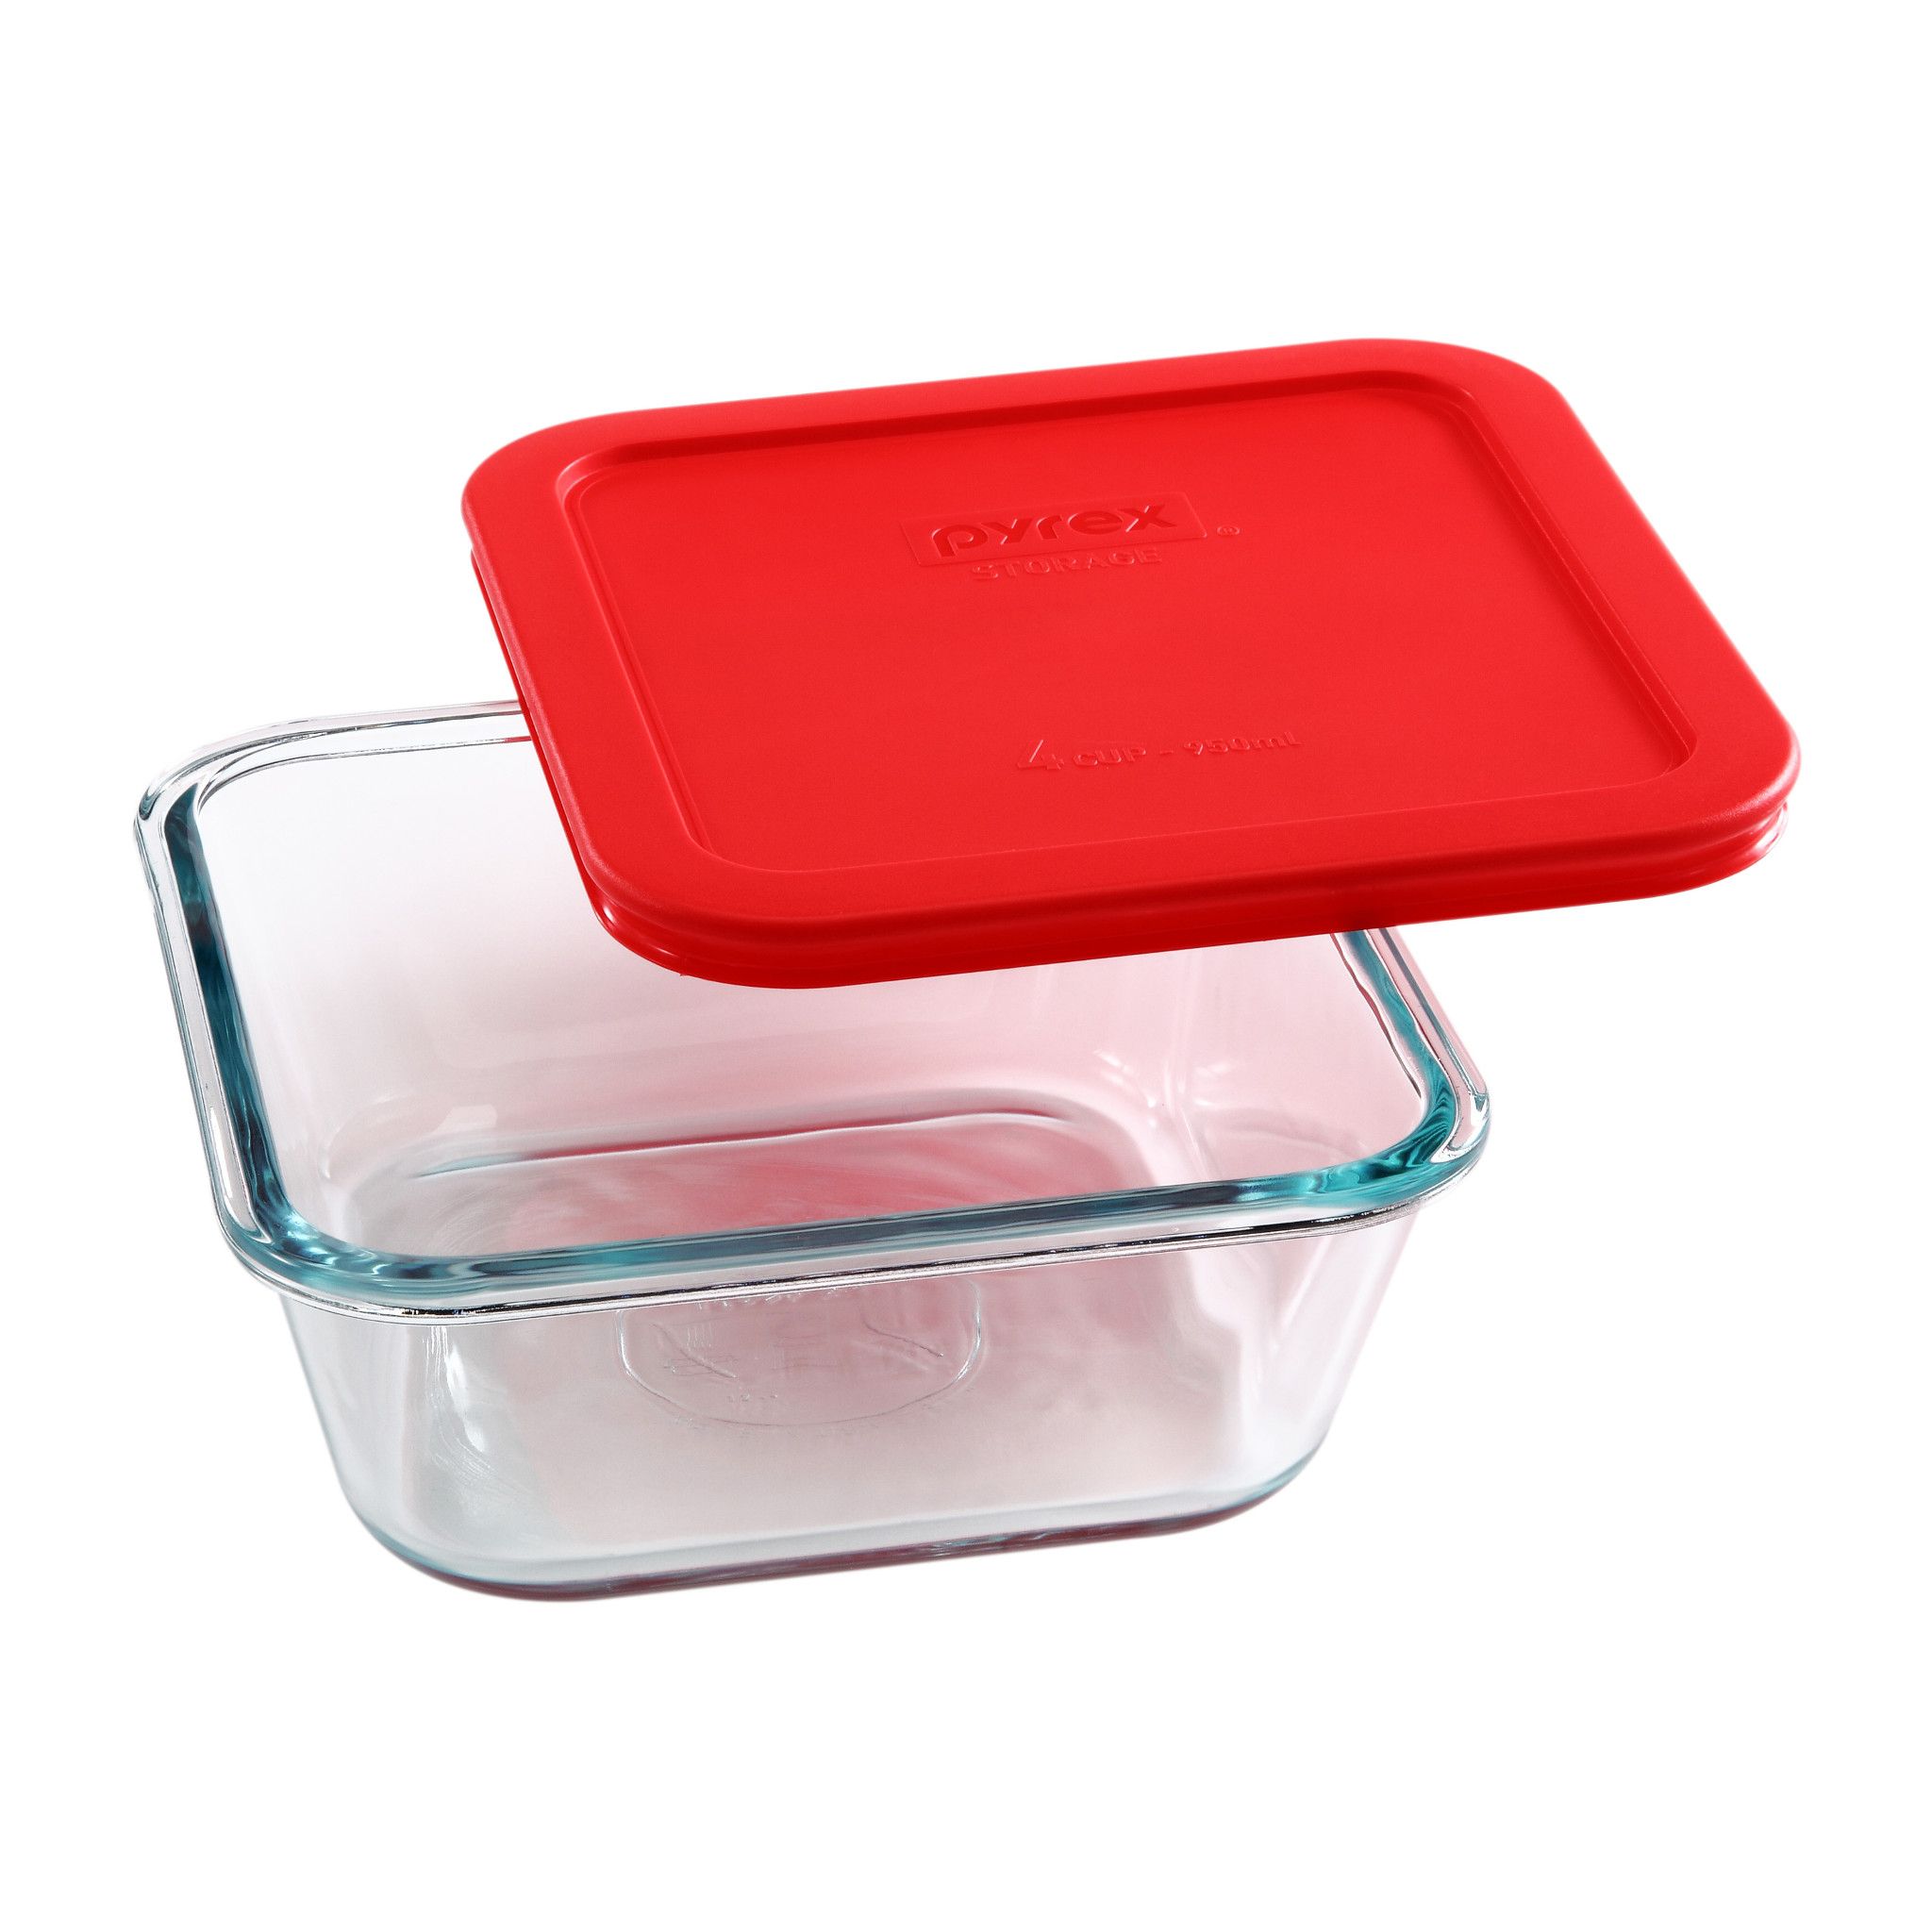 Storage Plus 4-cup Square Glass Food Storage Container with Red